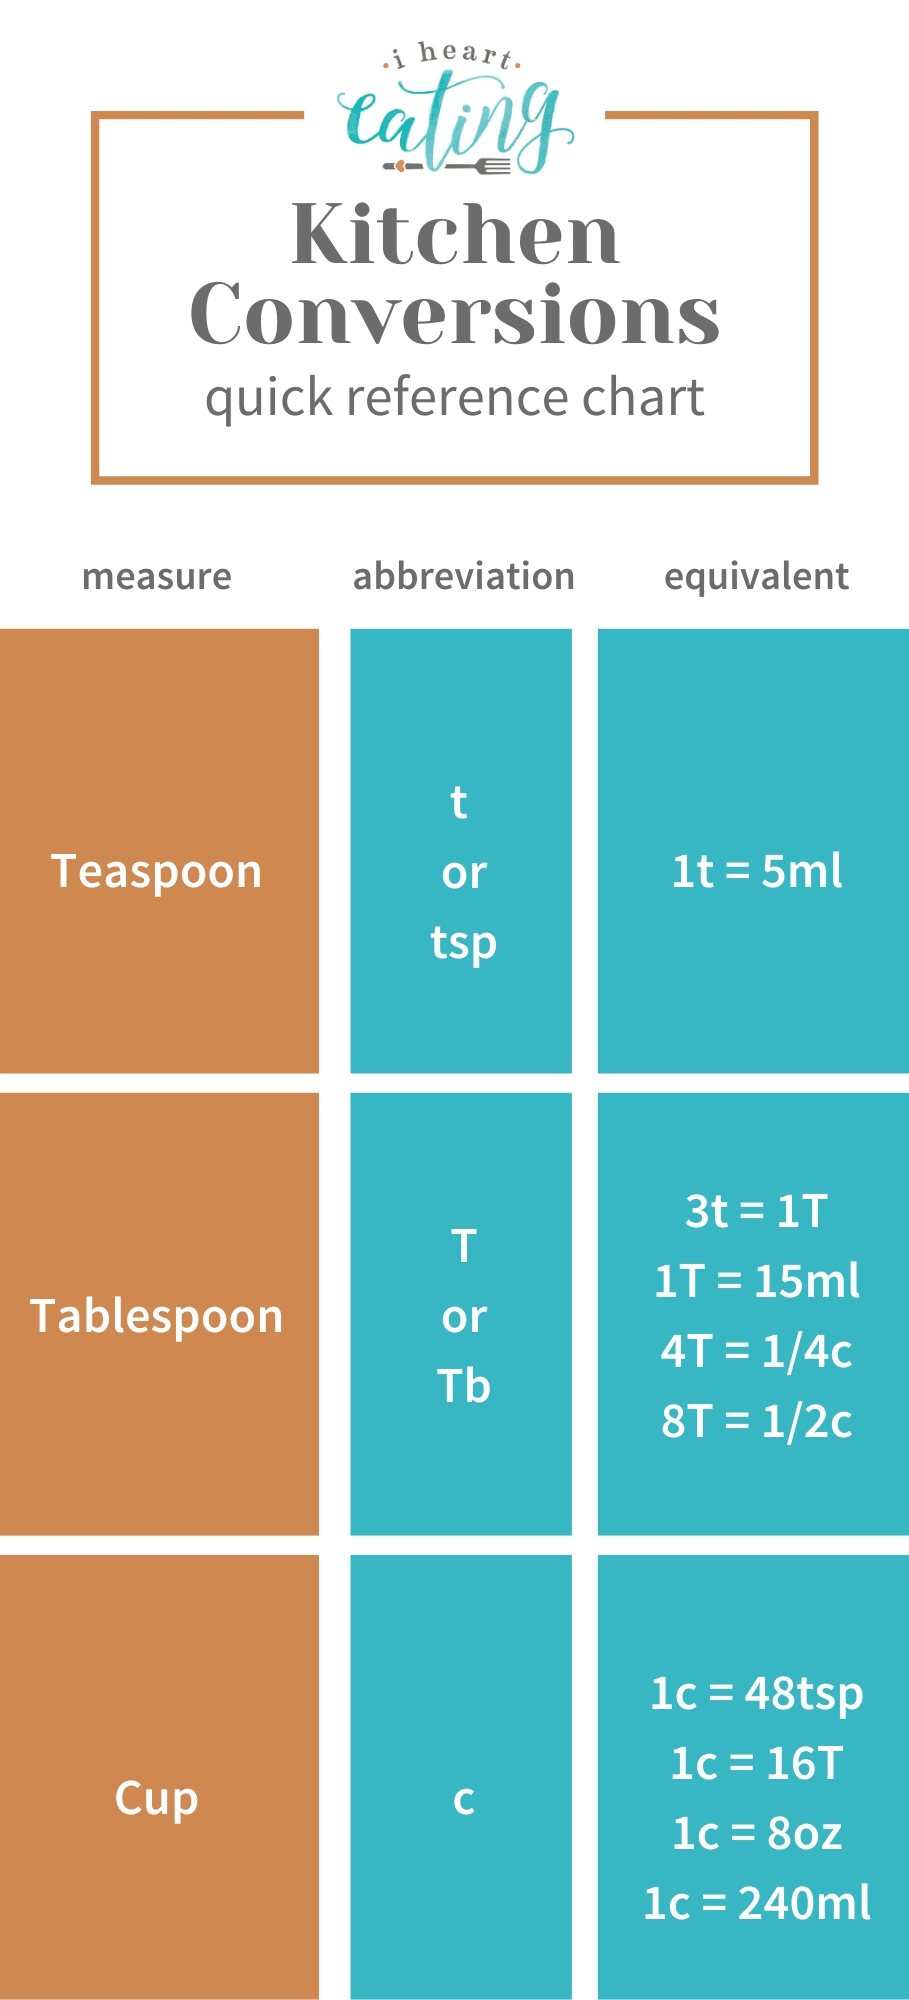 Kitchen conversion chart showing teaspoon, tablespoon and cup conversions.
